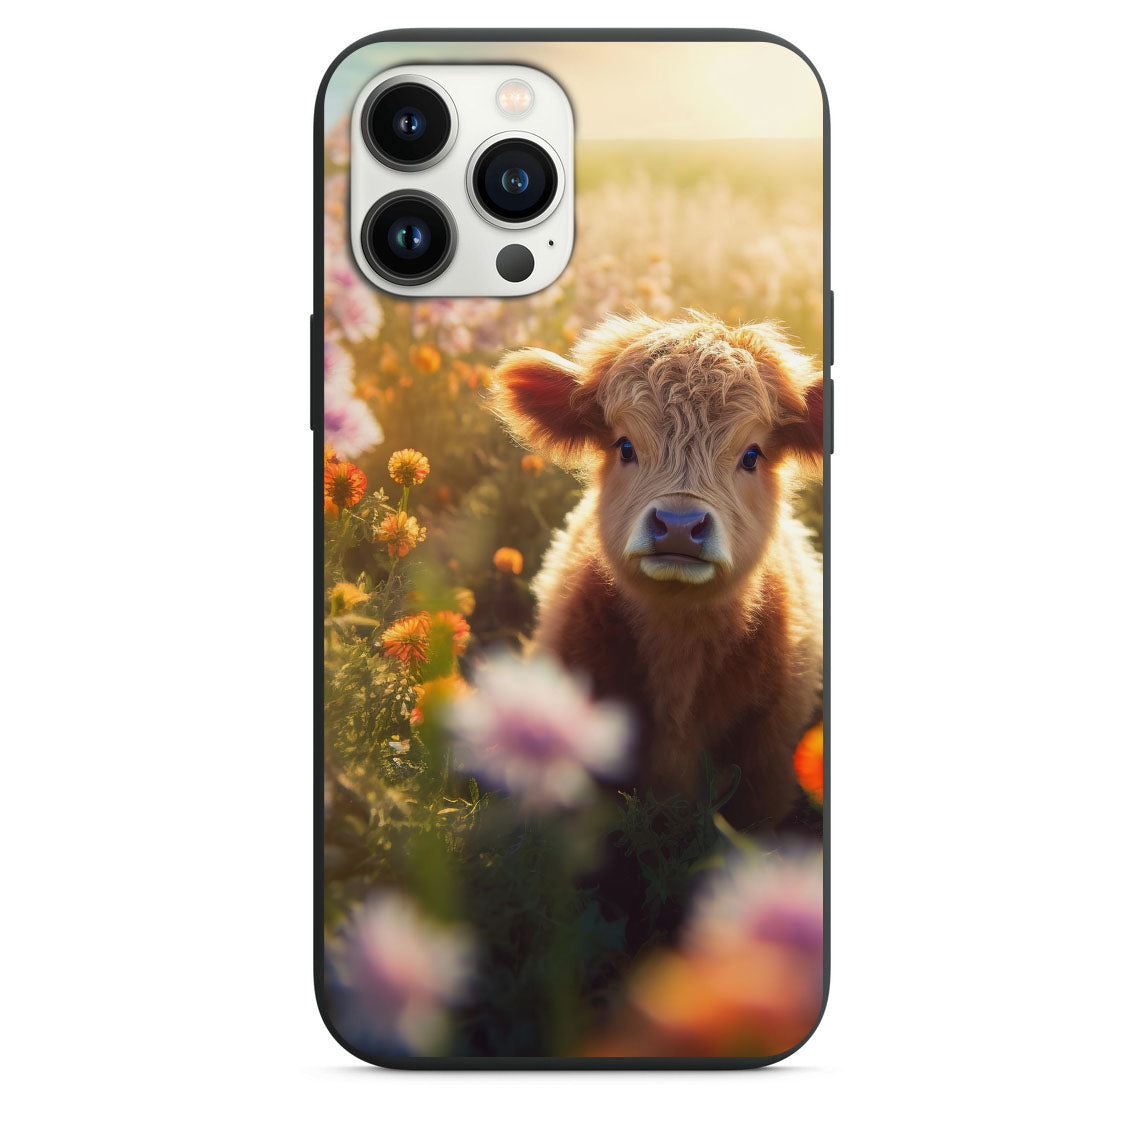 Cutest Baby Cow Hiding in Flower Field Design Phone Case for iPhone 7 8 X XS XR SE 11 12 13 14 Pro Max Mini